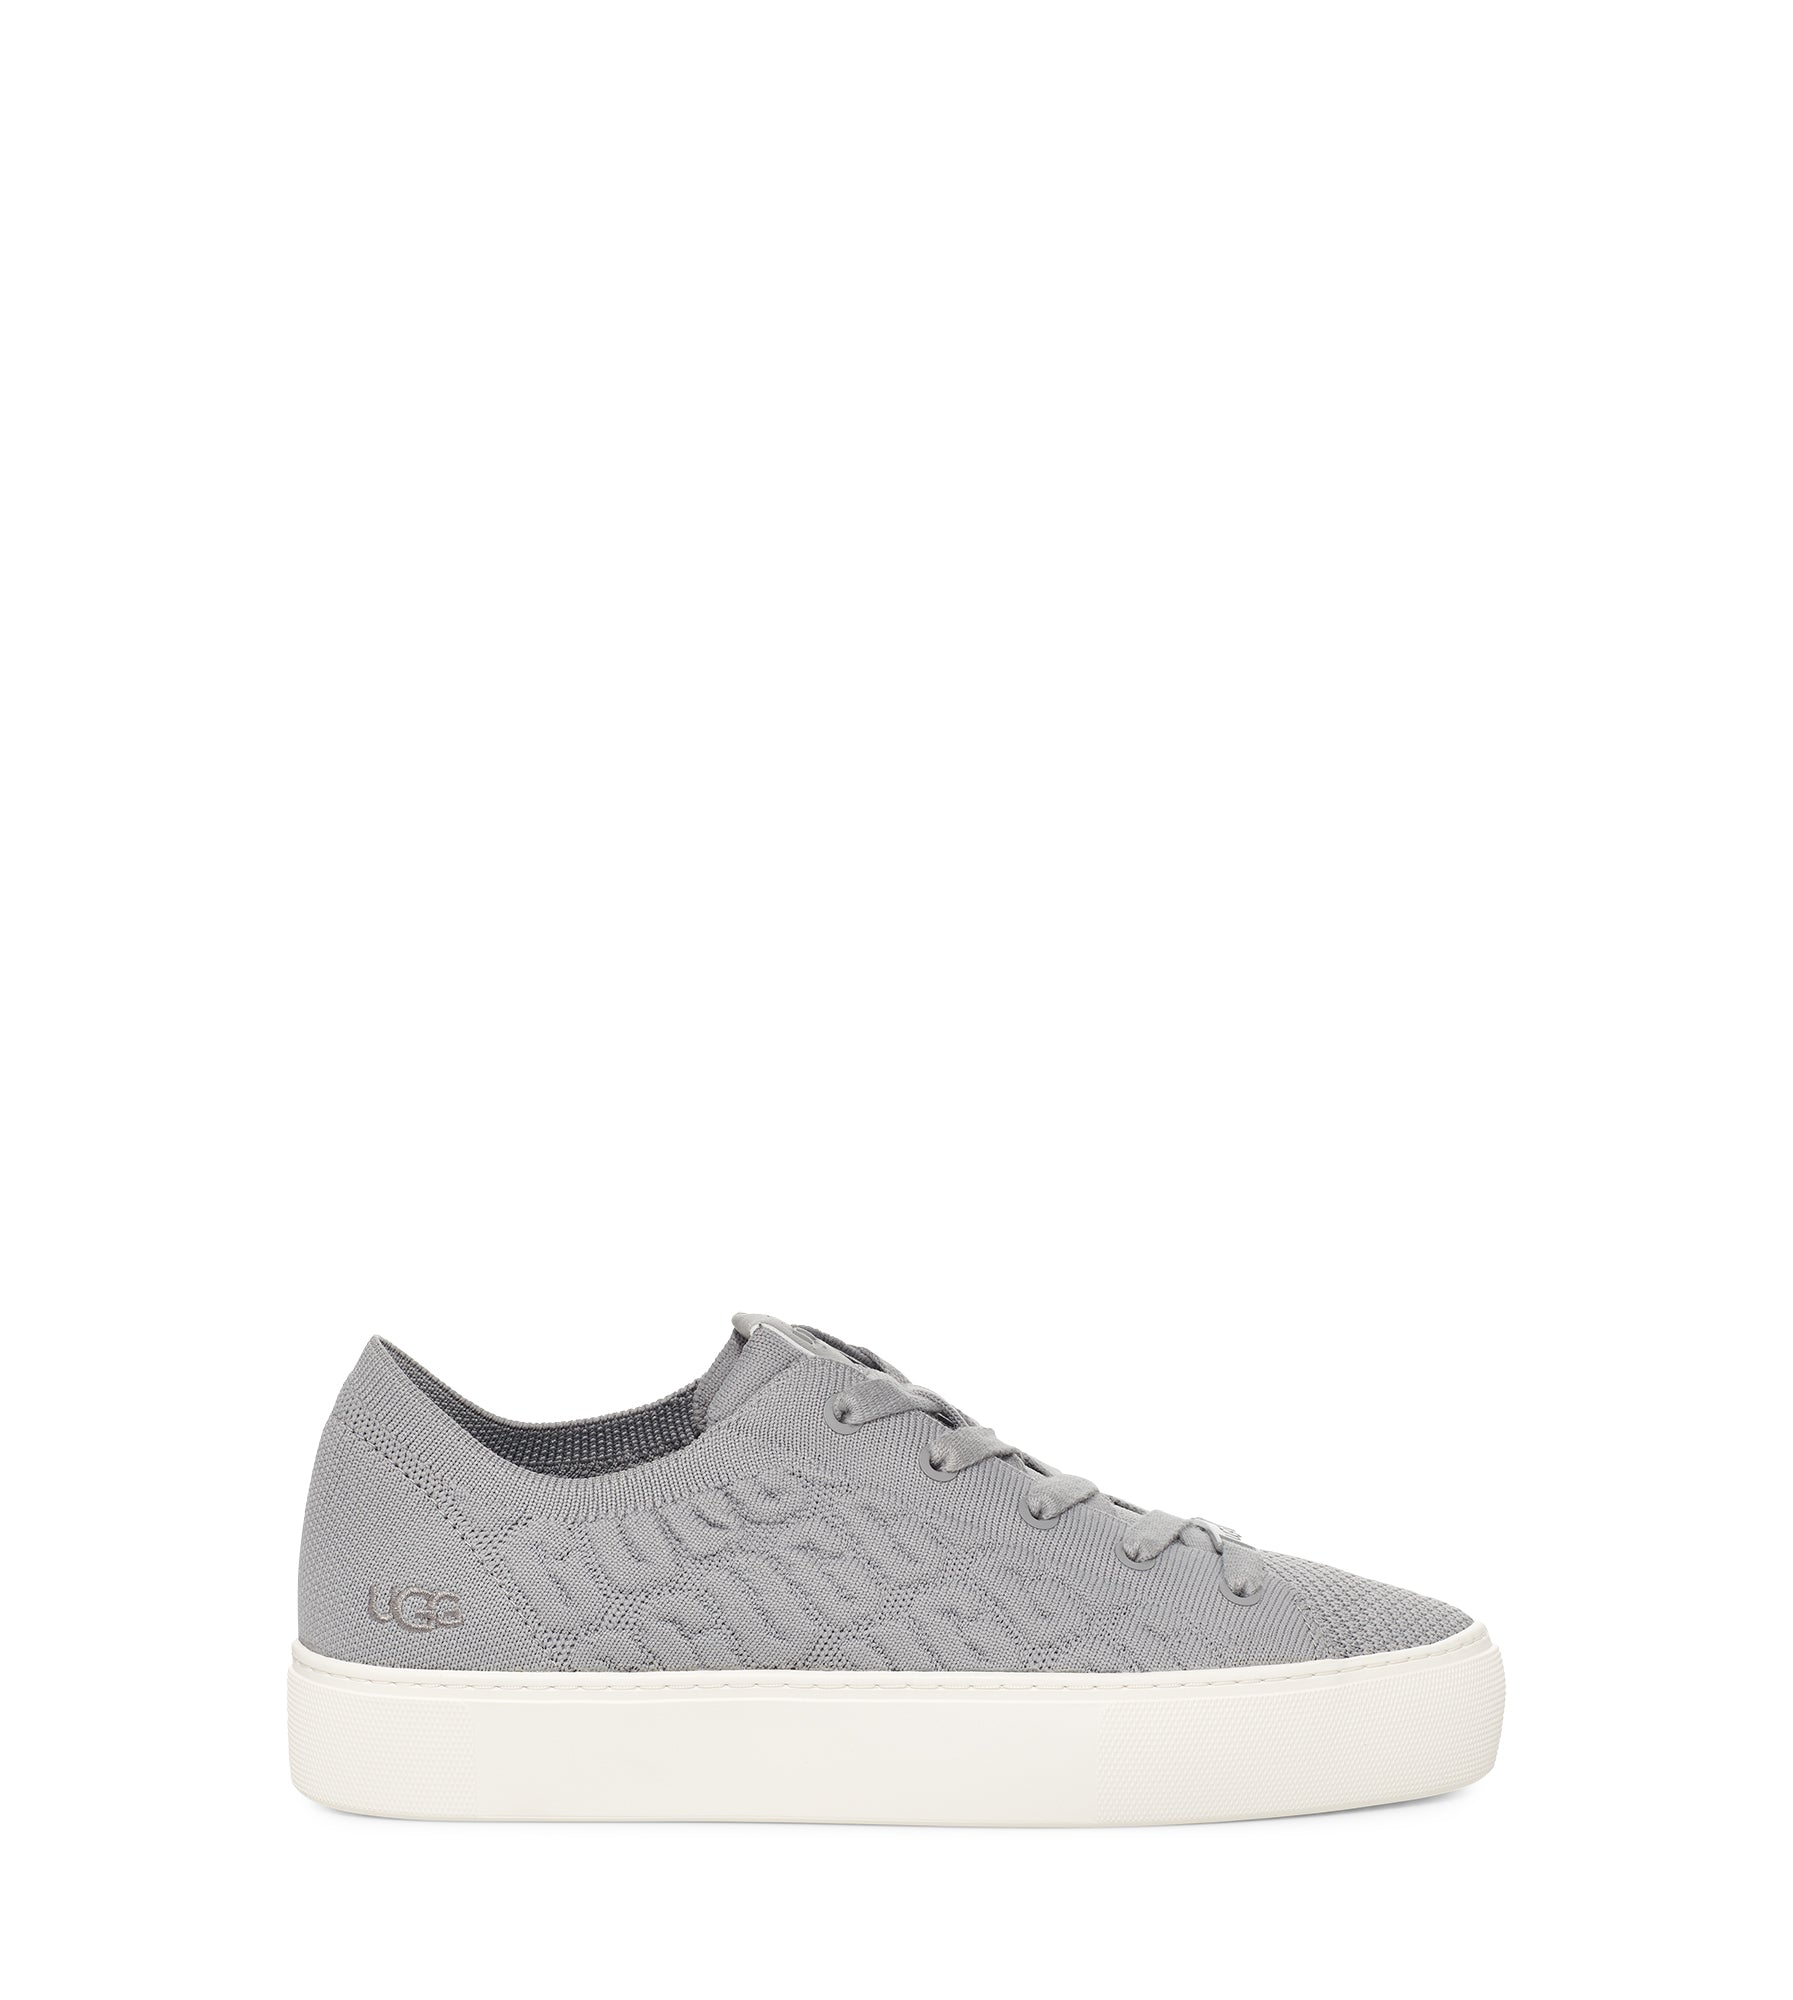 UGG UGG Dinale Graphic Knit Sneaker Cobble 3 